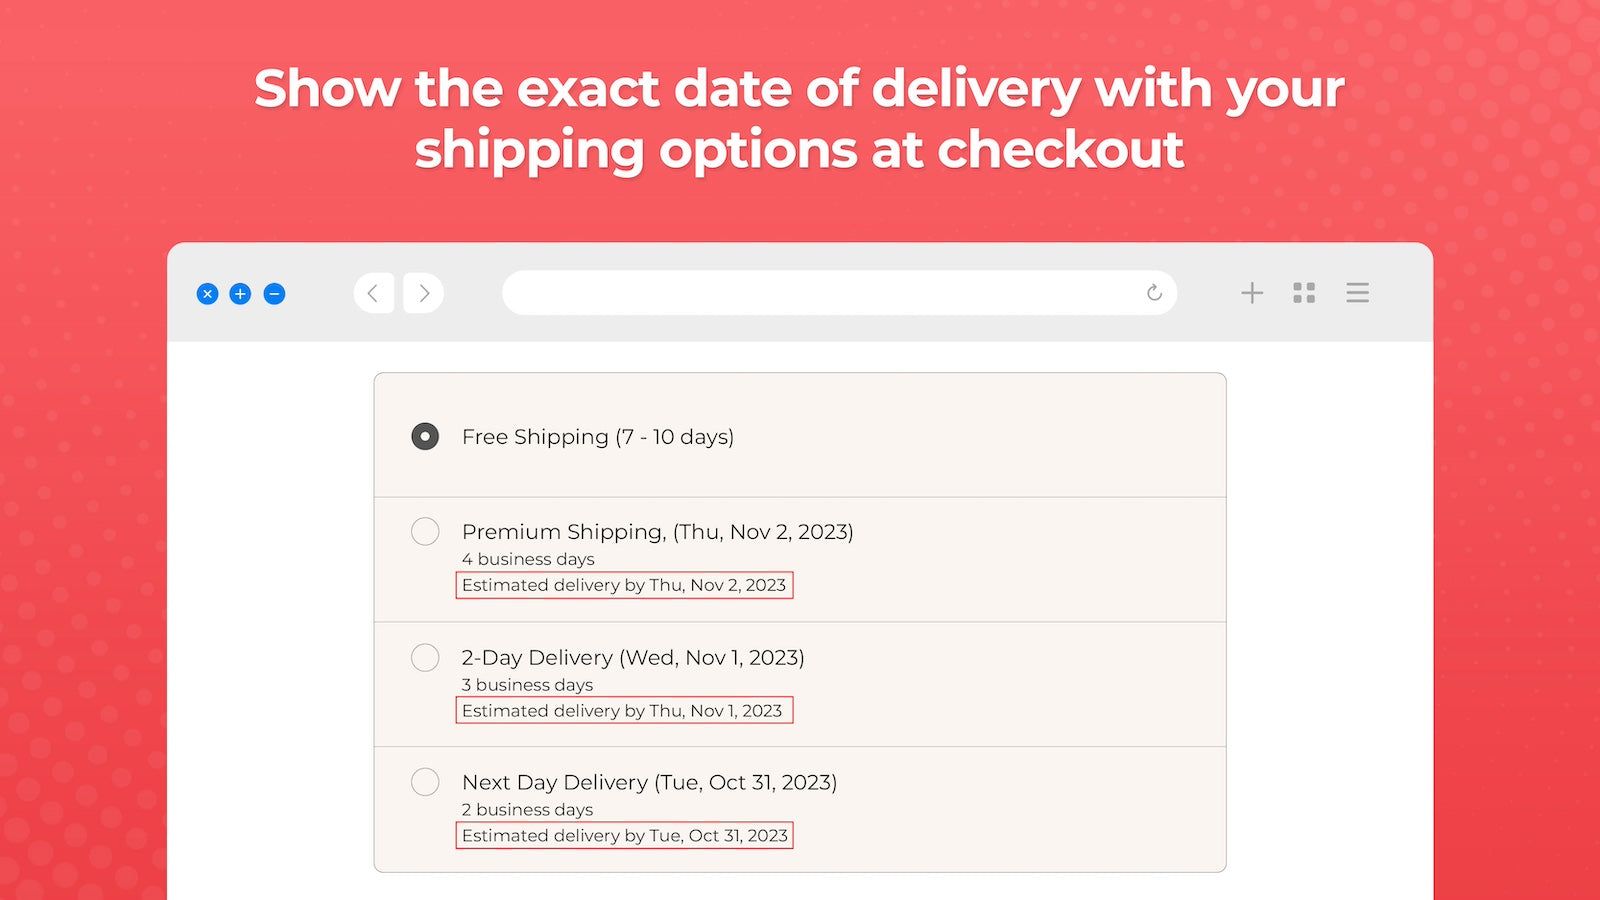 Show the exact date of delivery with your shipping options